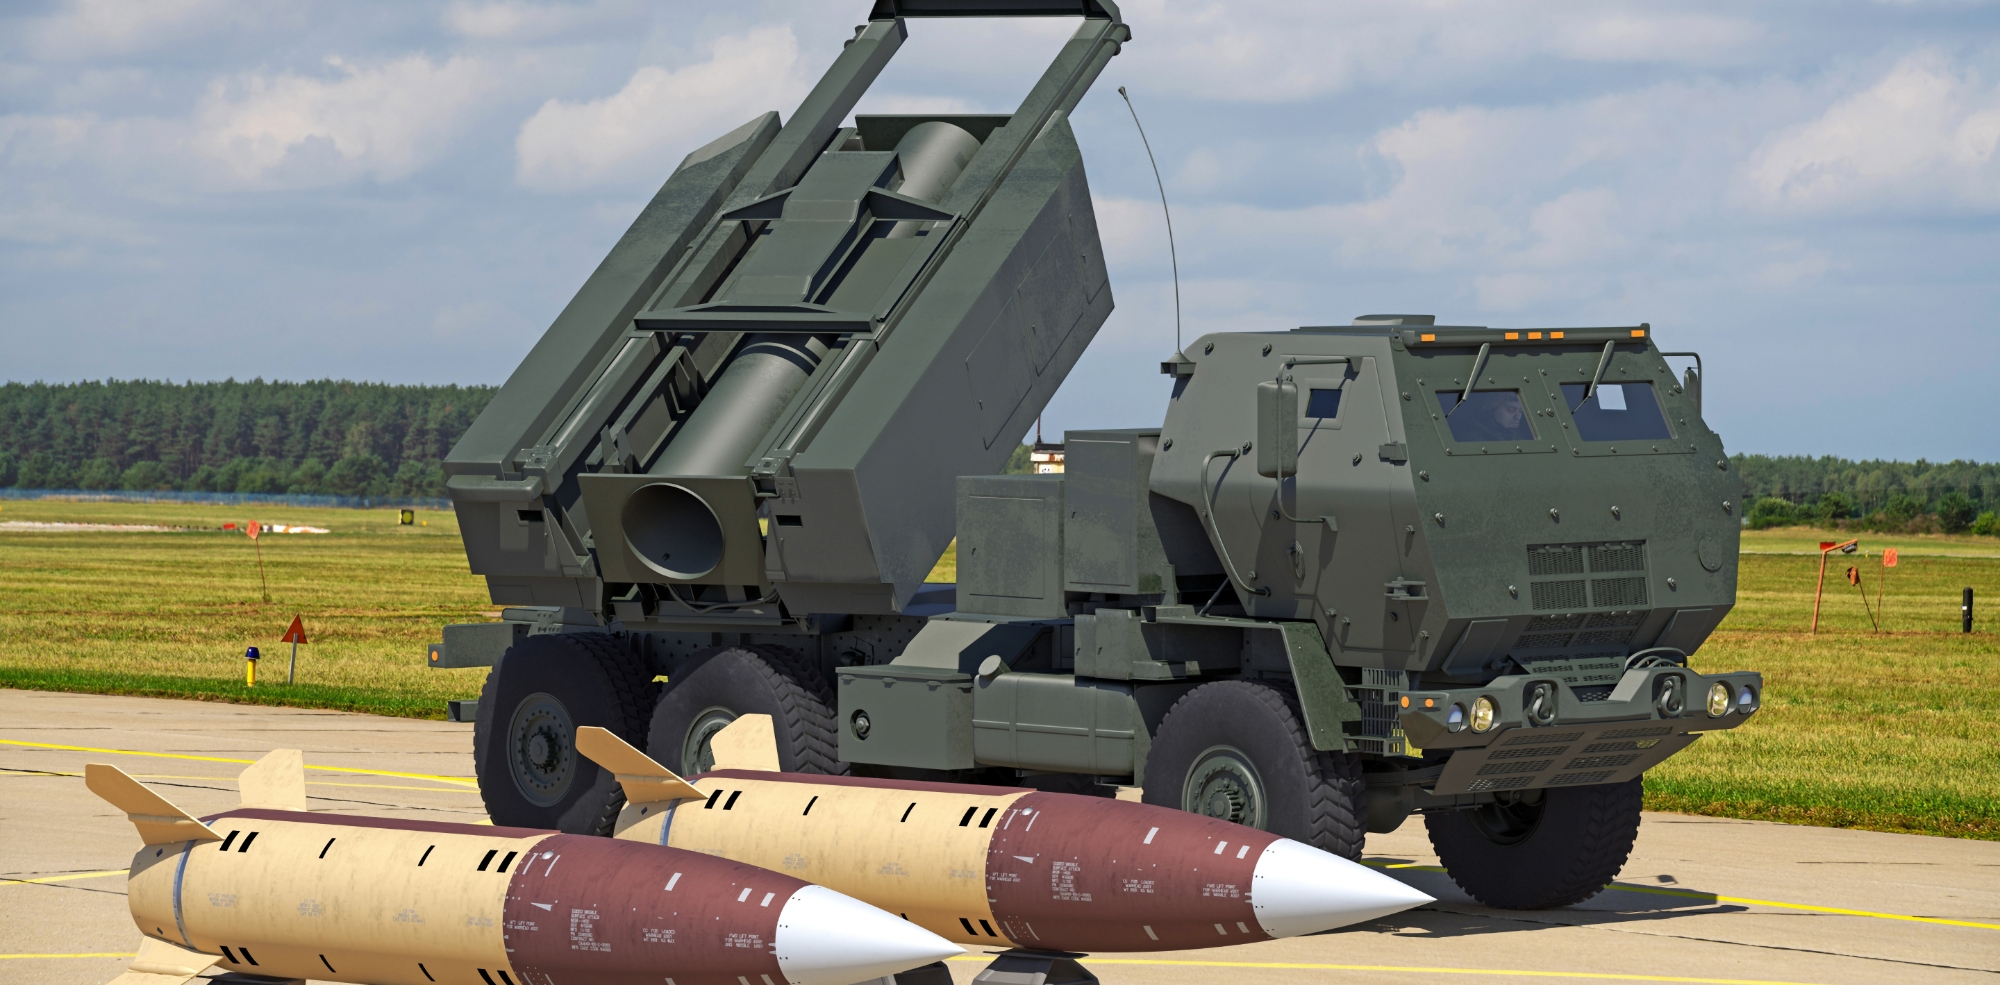 Contract worth more than $200,000,000: Estonia buys Lockheed Martin's HIMARS MLRS with ATACMS ballistic missiles, which can hit targets up to 300 kilometers away